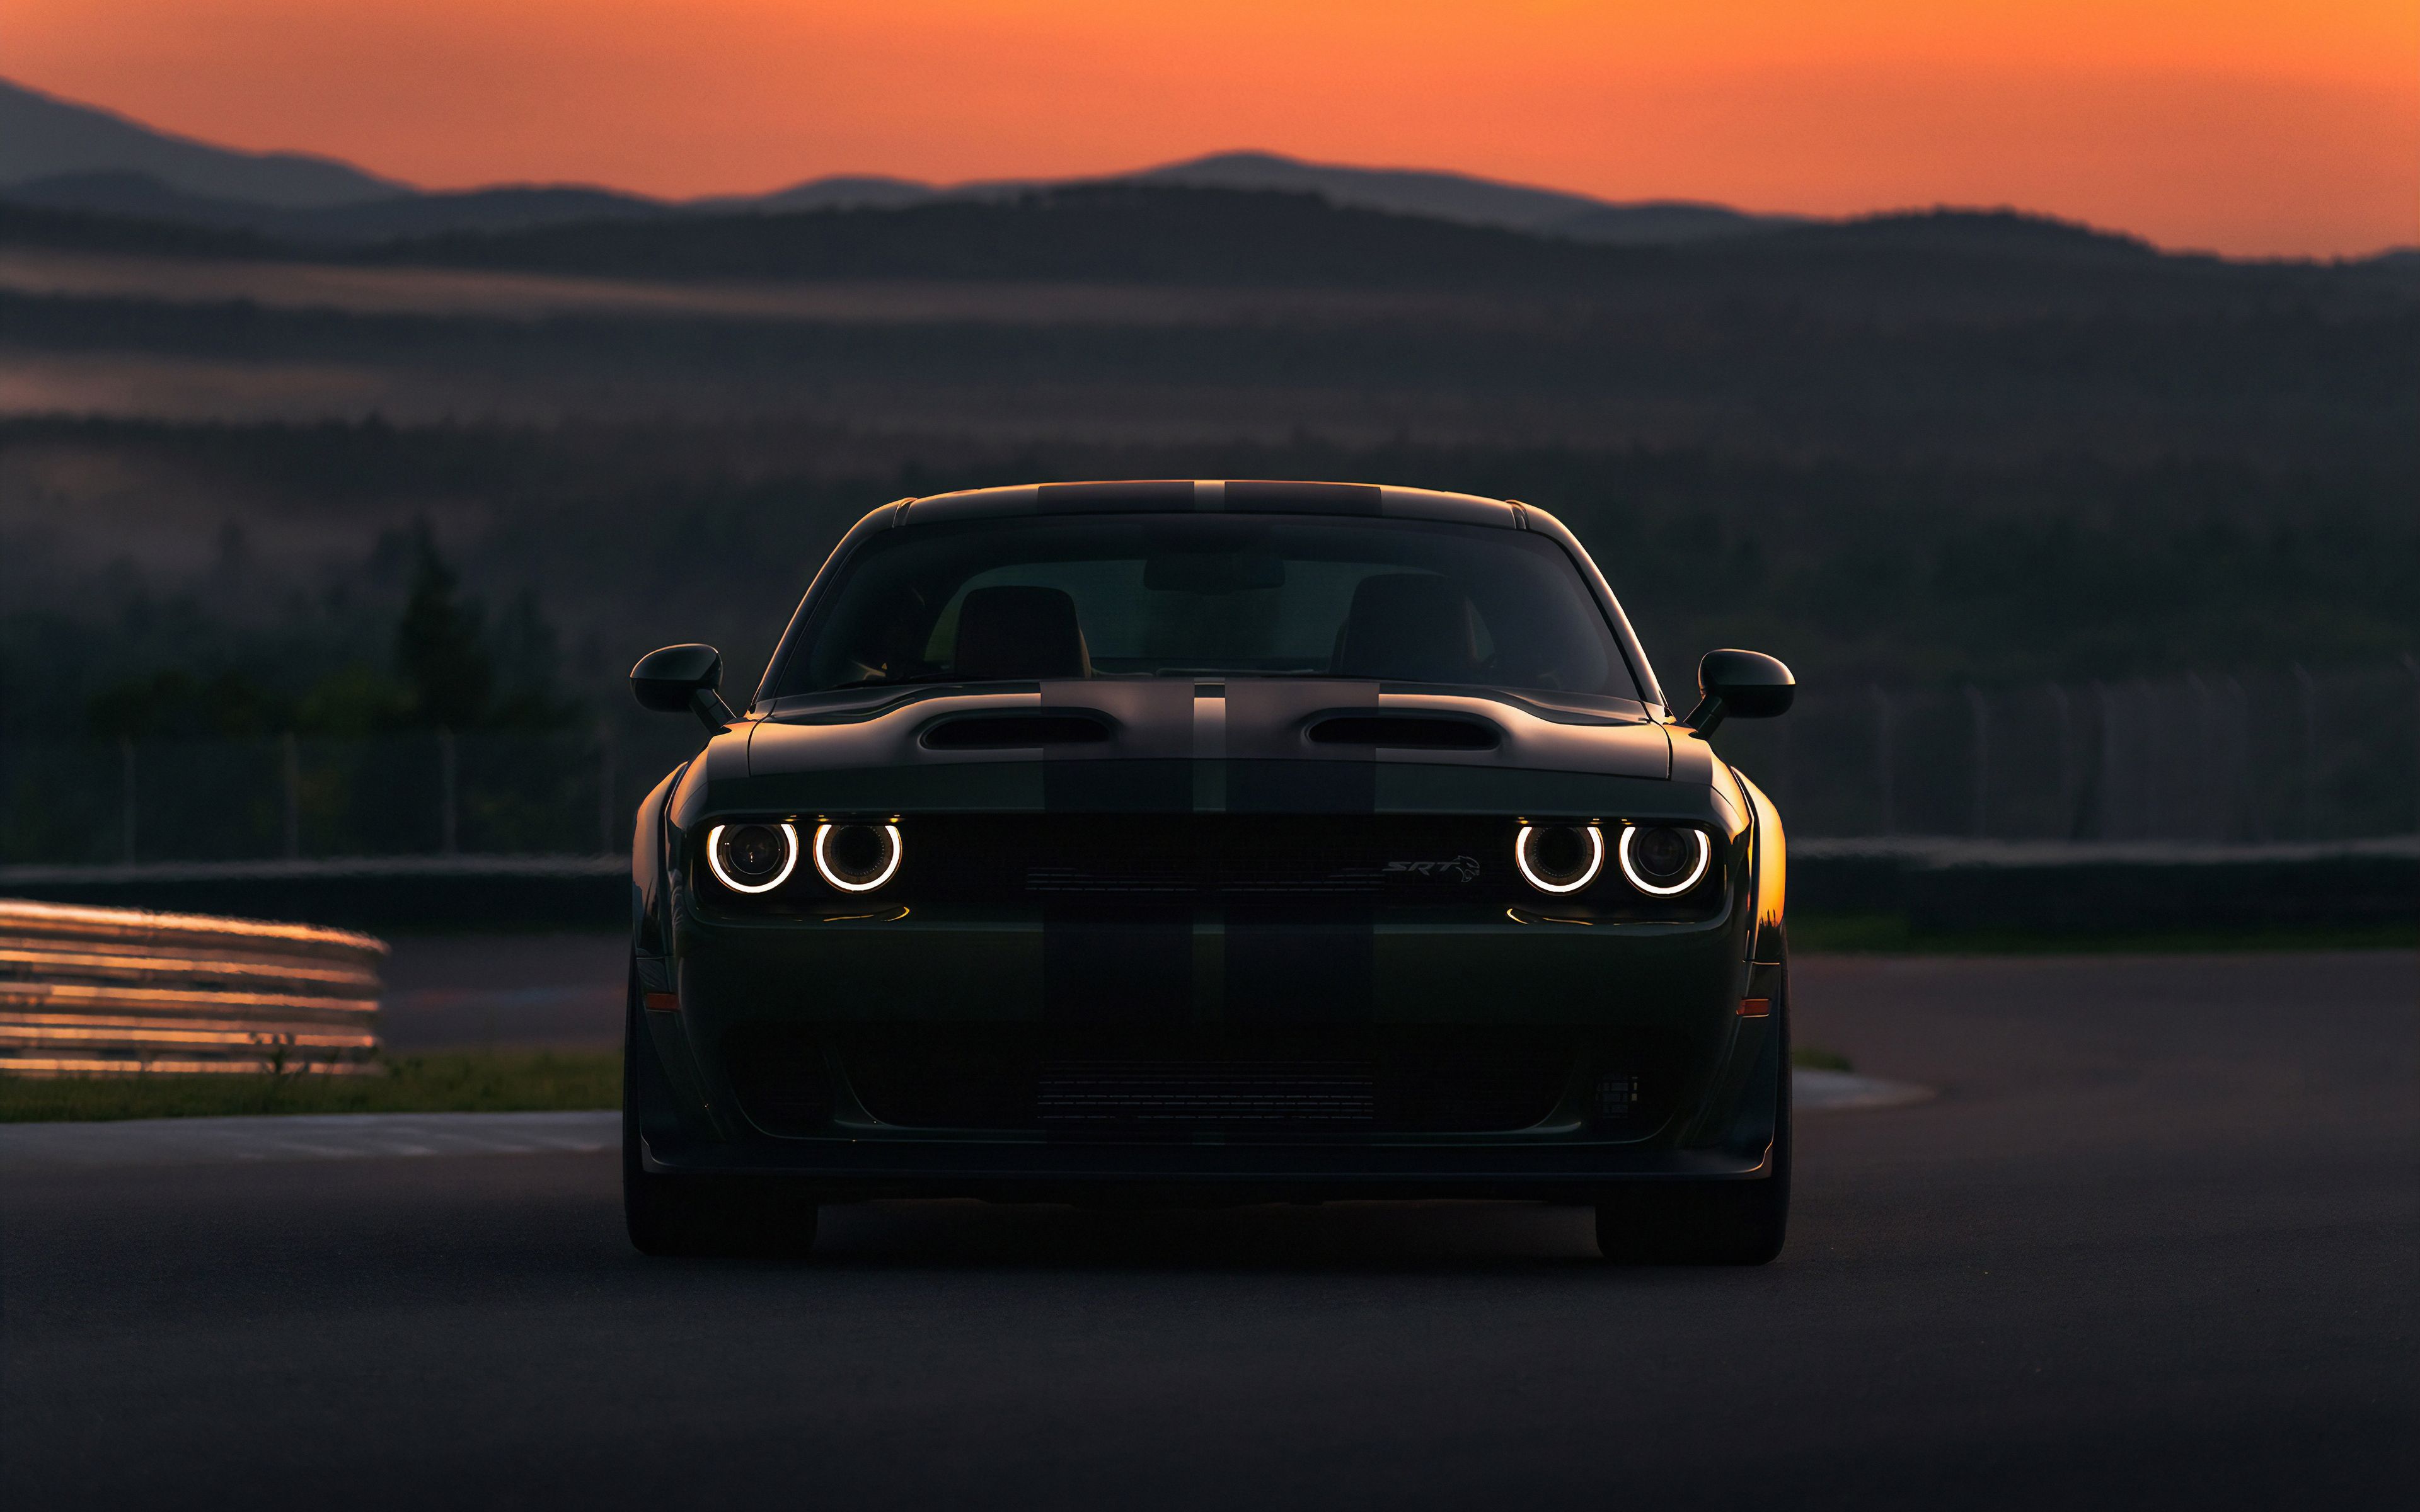 Car Wallpaper Dark - Rev Up Your Screens with Stunning Car Wallpapers